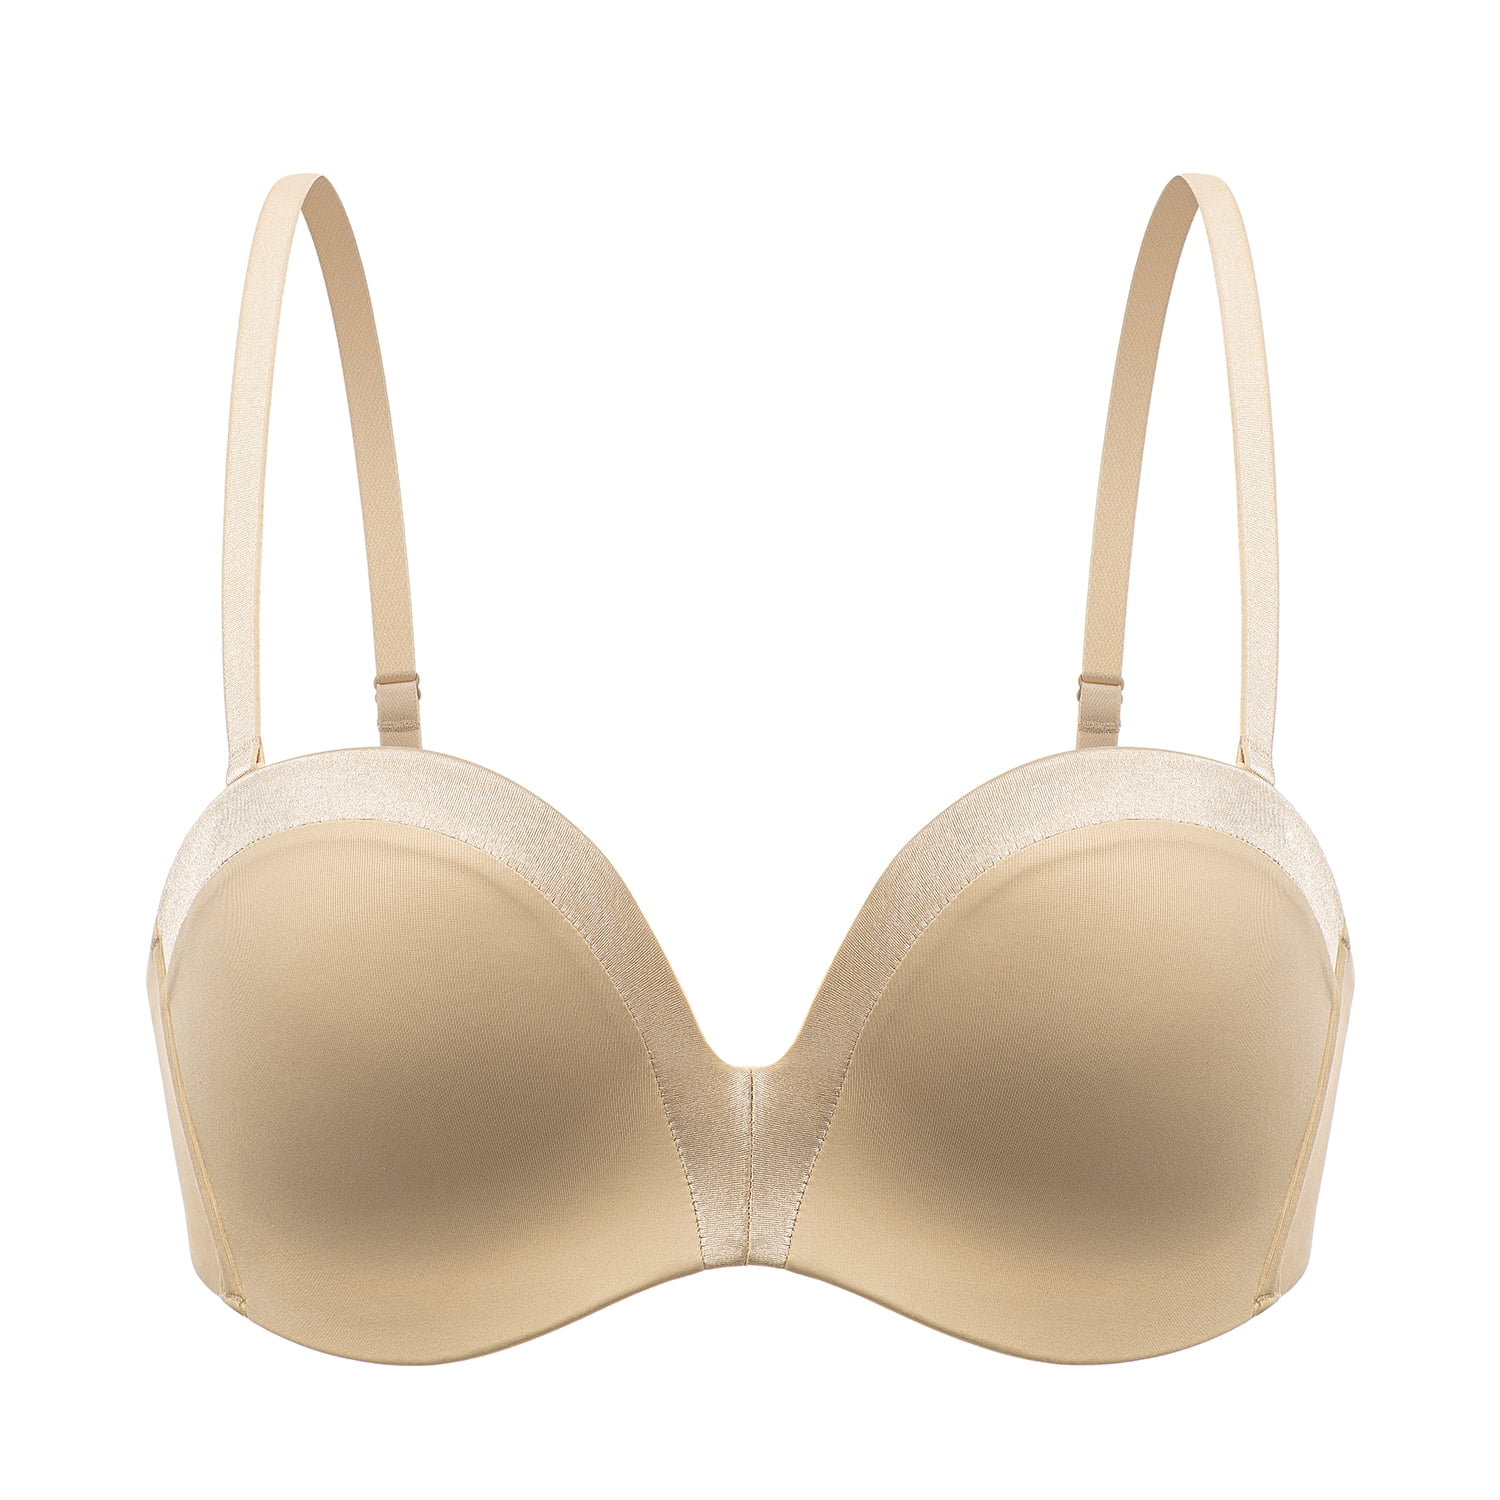 Vgplay Beige 34A Strapless Bra with Clear Straps Convertible